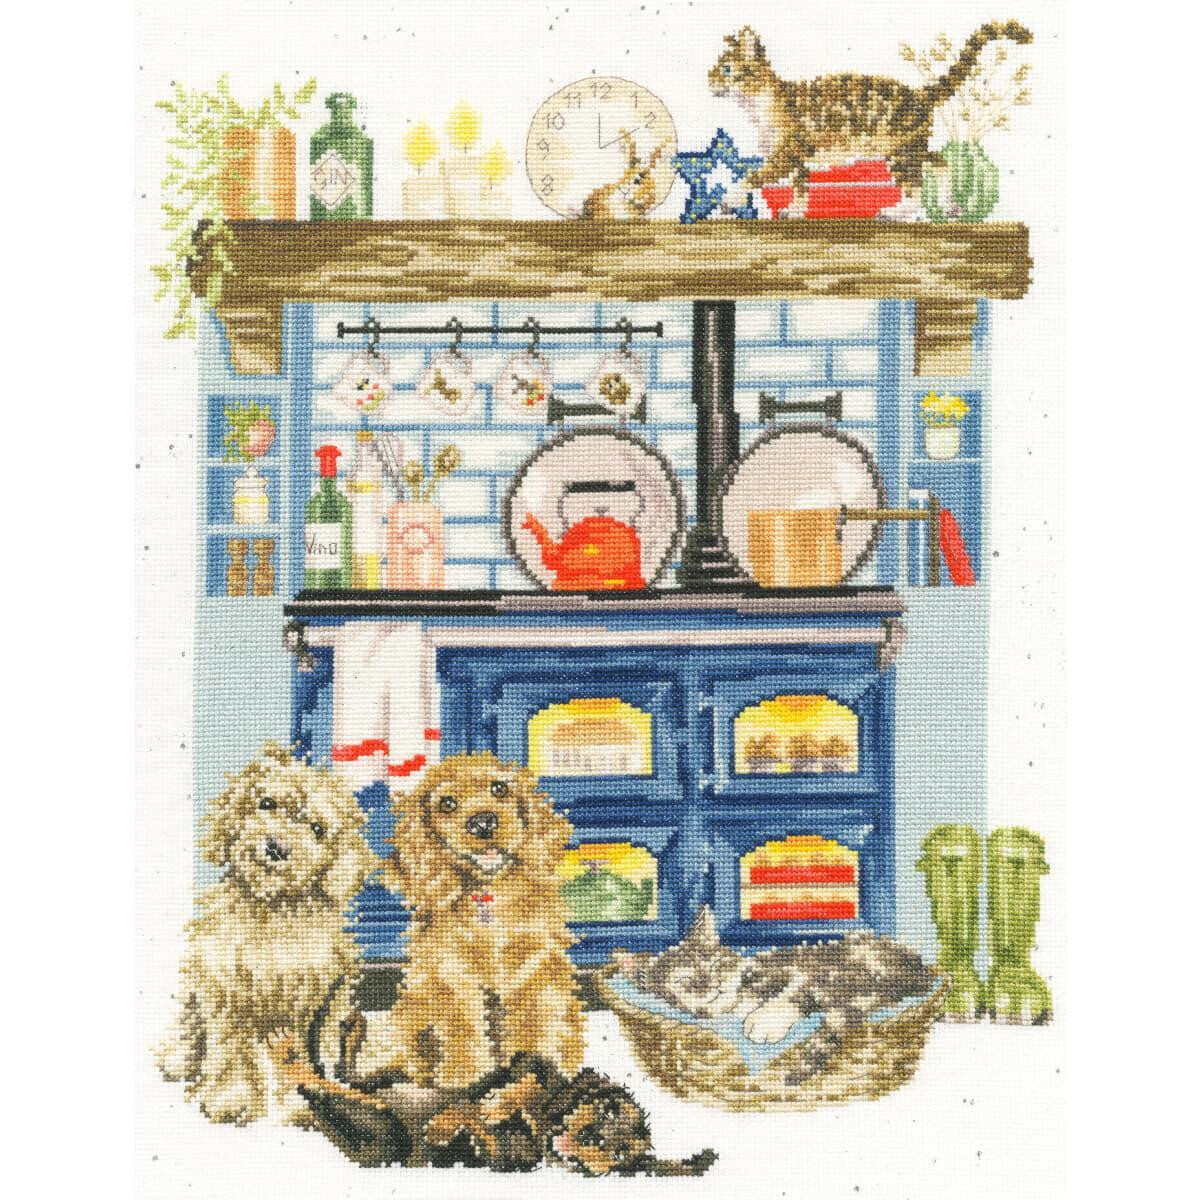 A cozy kitchen scene with a blue stove and a lively fire...